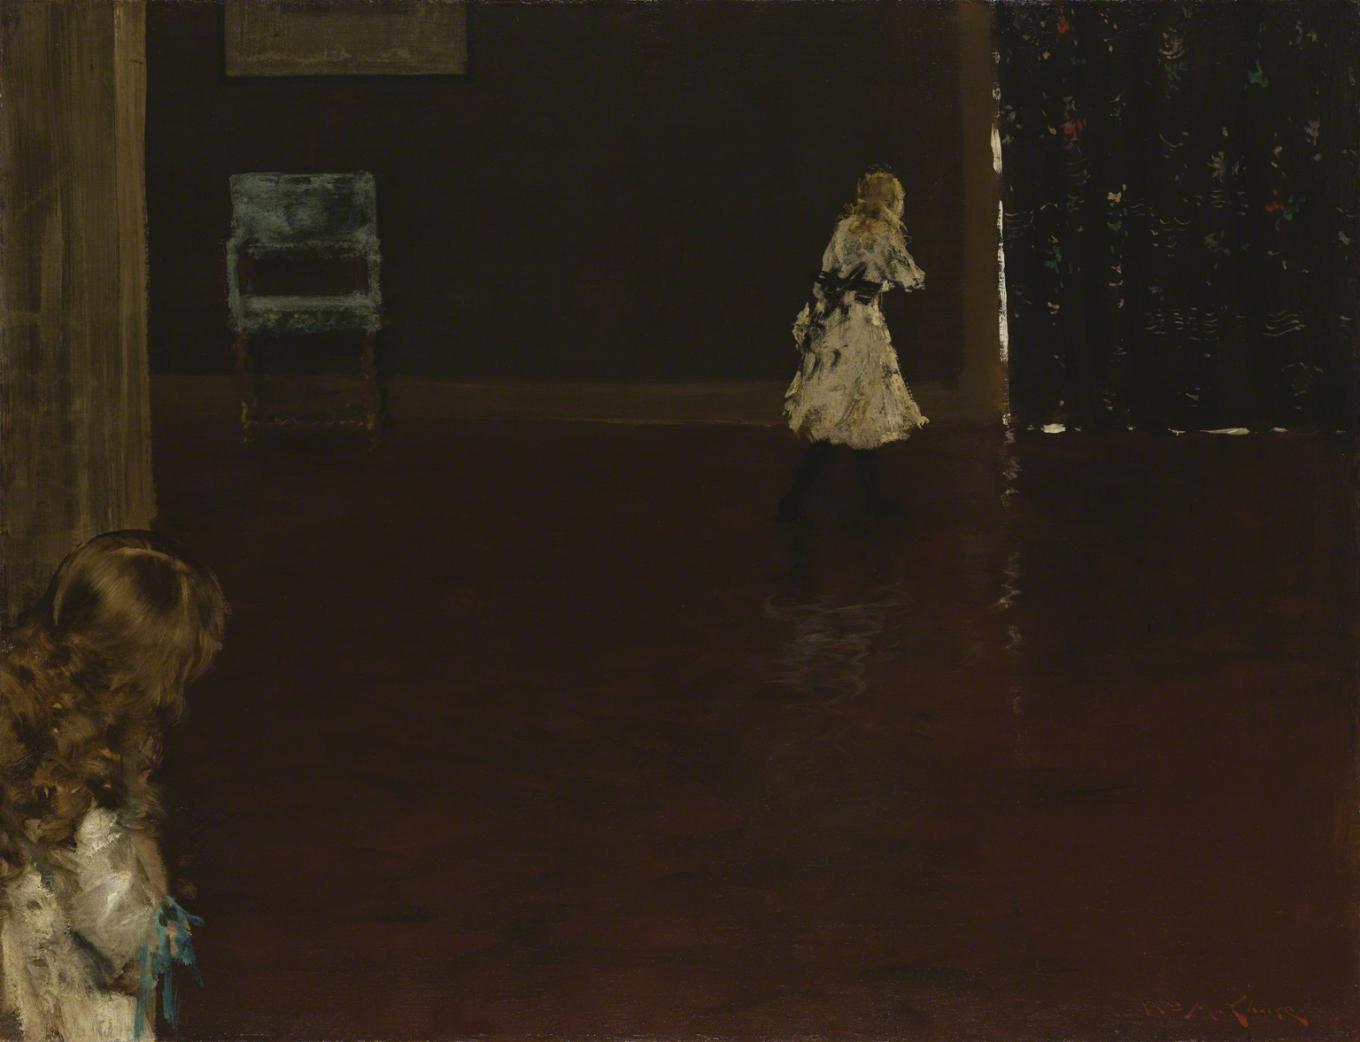 William Merritt Chase, Hide and Seek, 1888. Oil on canvas, 27 5/8 x 35 7/8 in. The Phillips Collection, Washington, D.C. Acquired 1923.